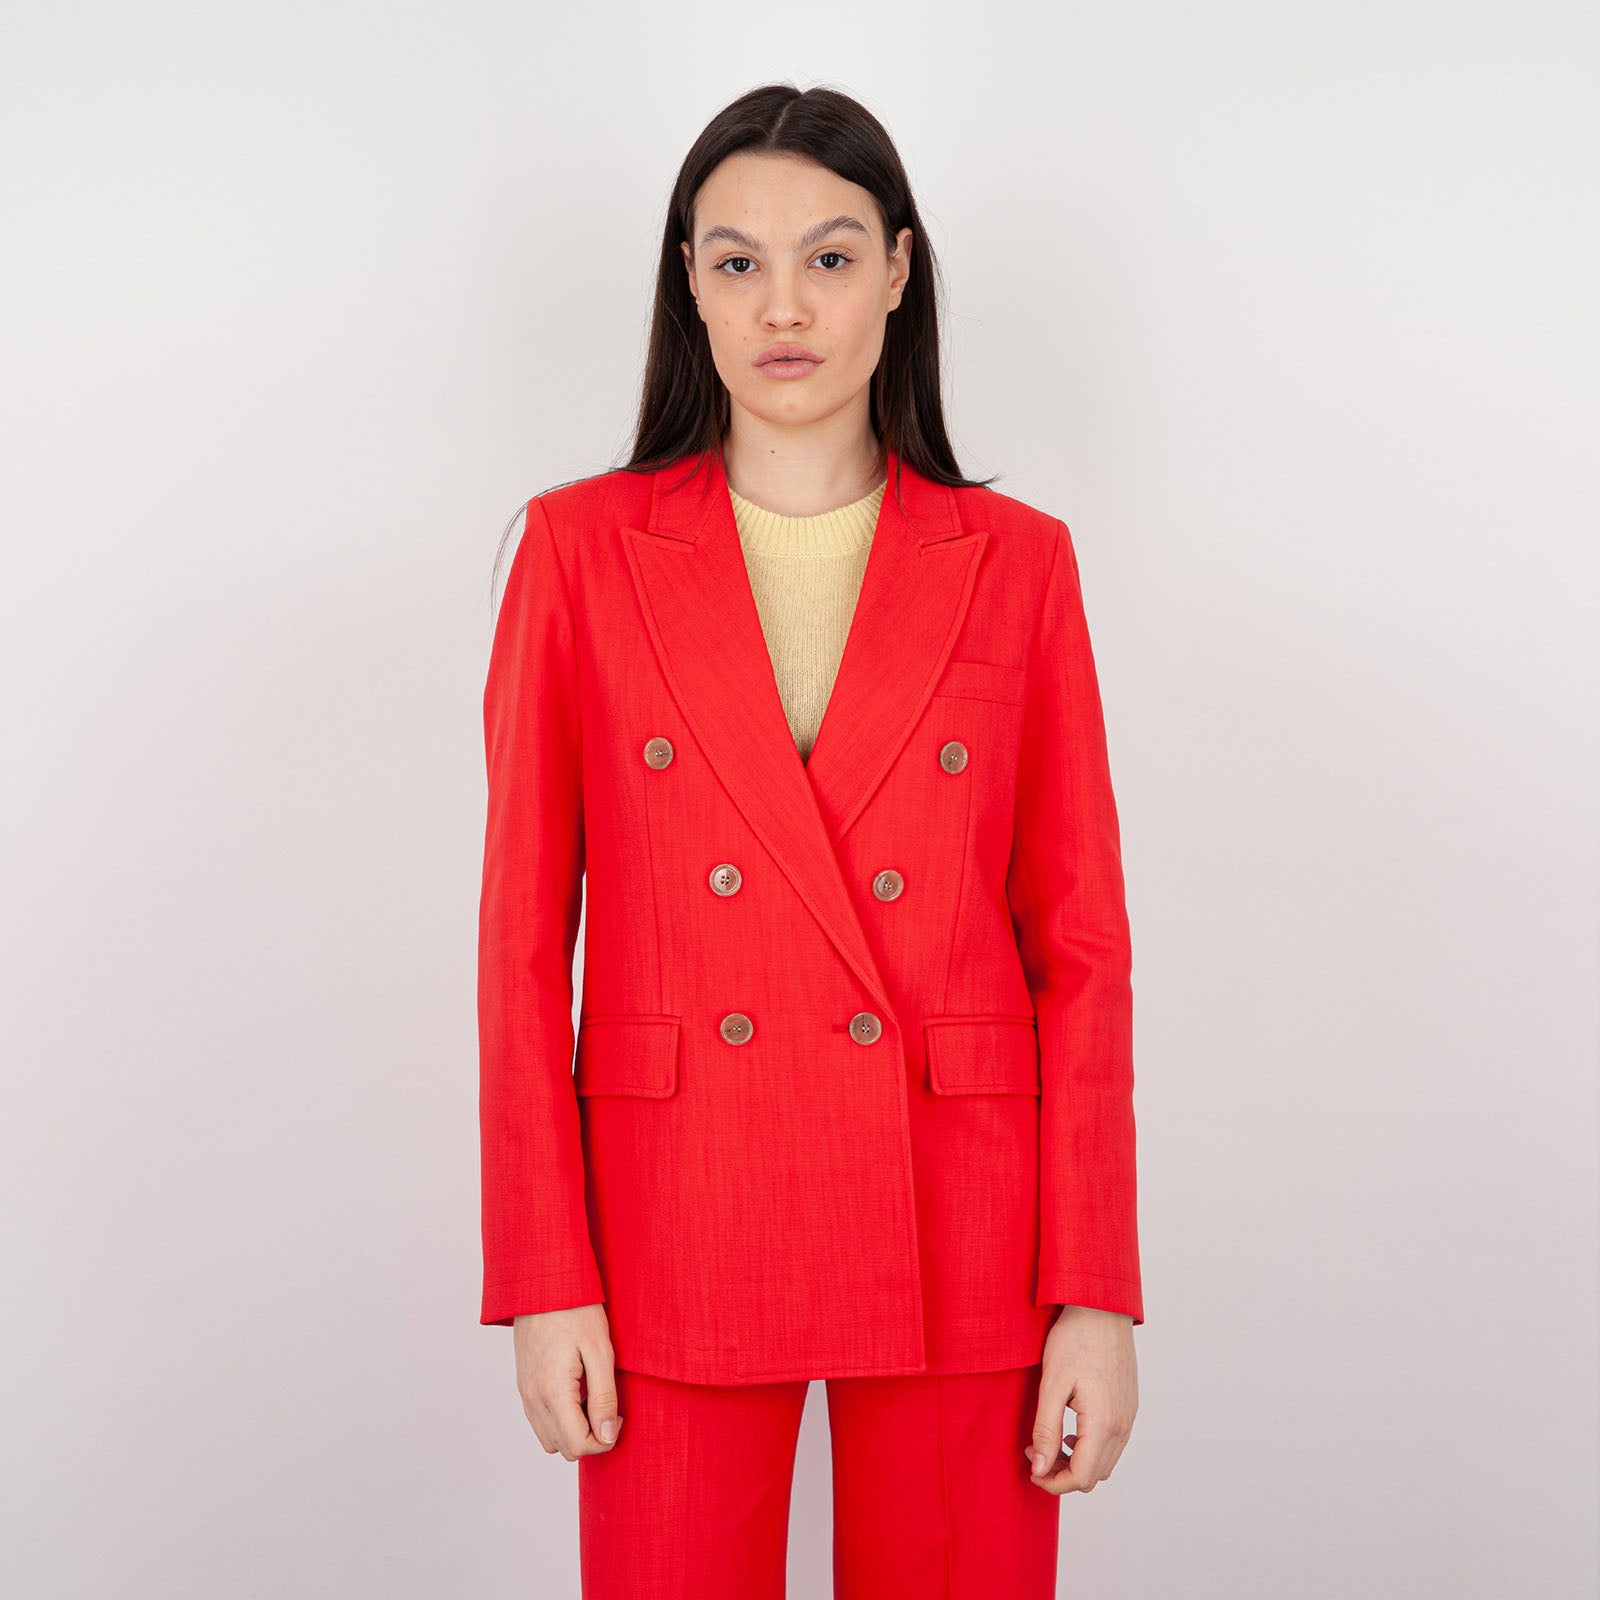 Department Five Synthetic Double-Breasted Coral Blazer - 7